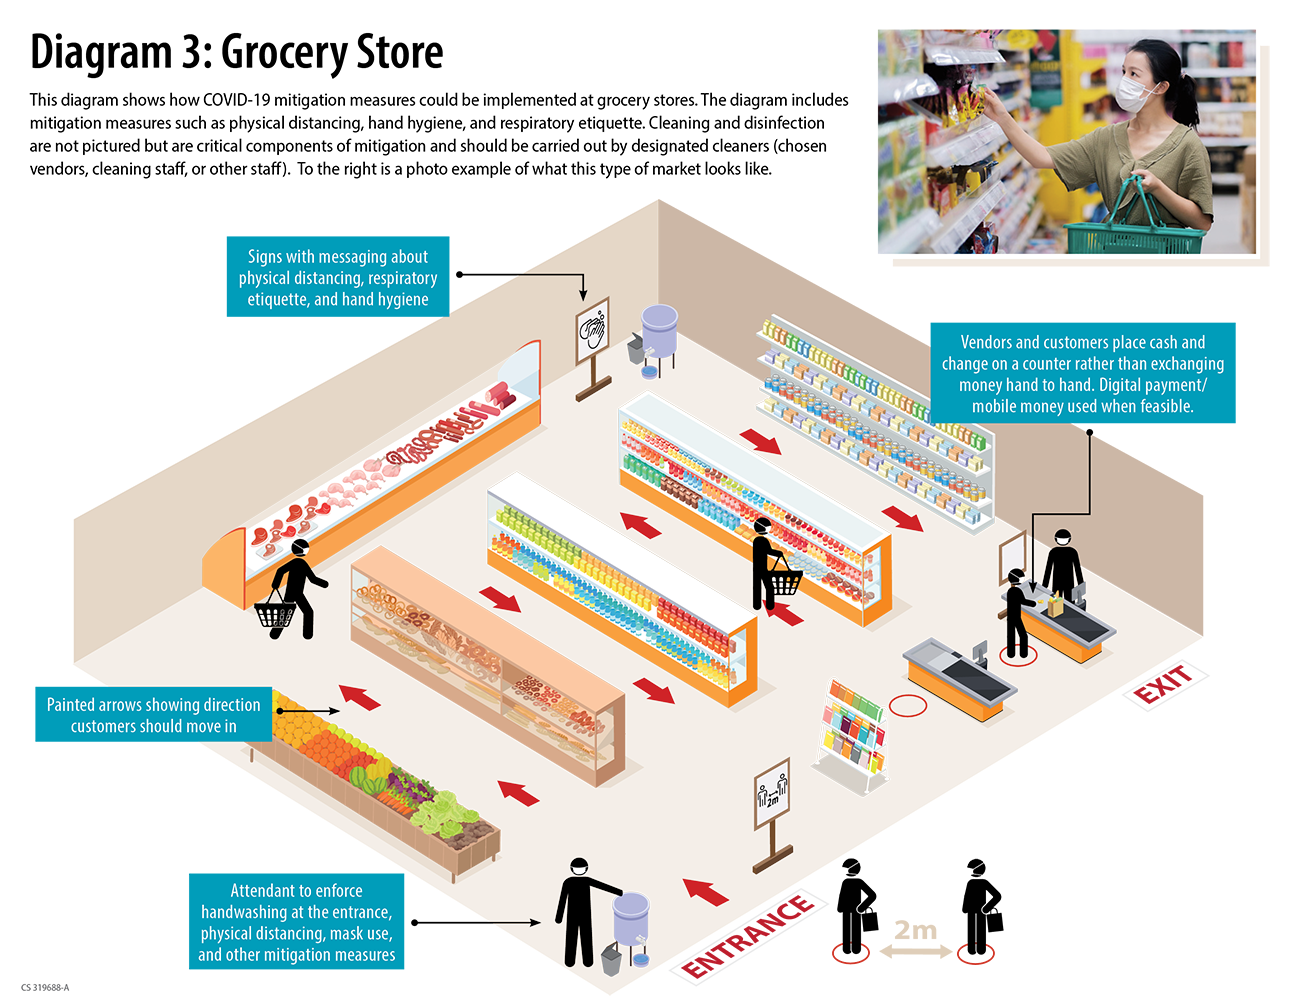 Diagram showing how COVID-19 mitigation measures could be implemented at grocery stores